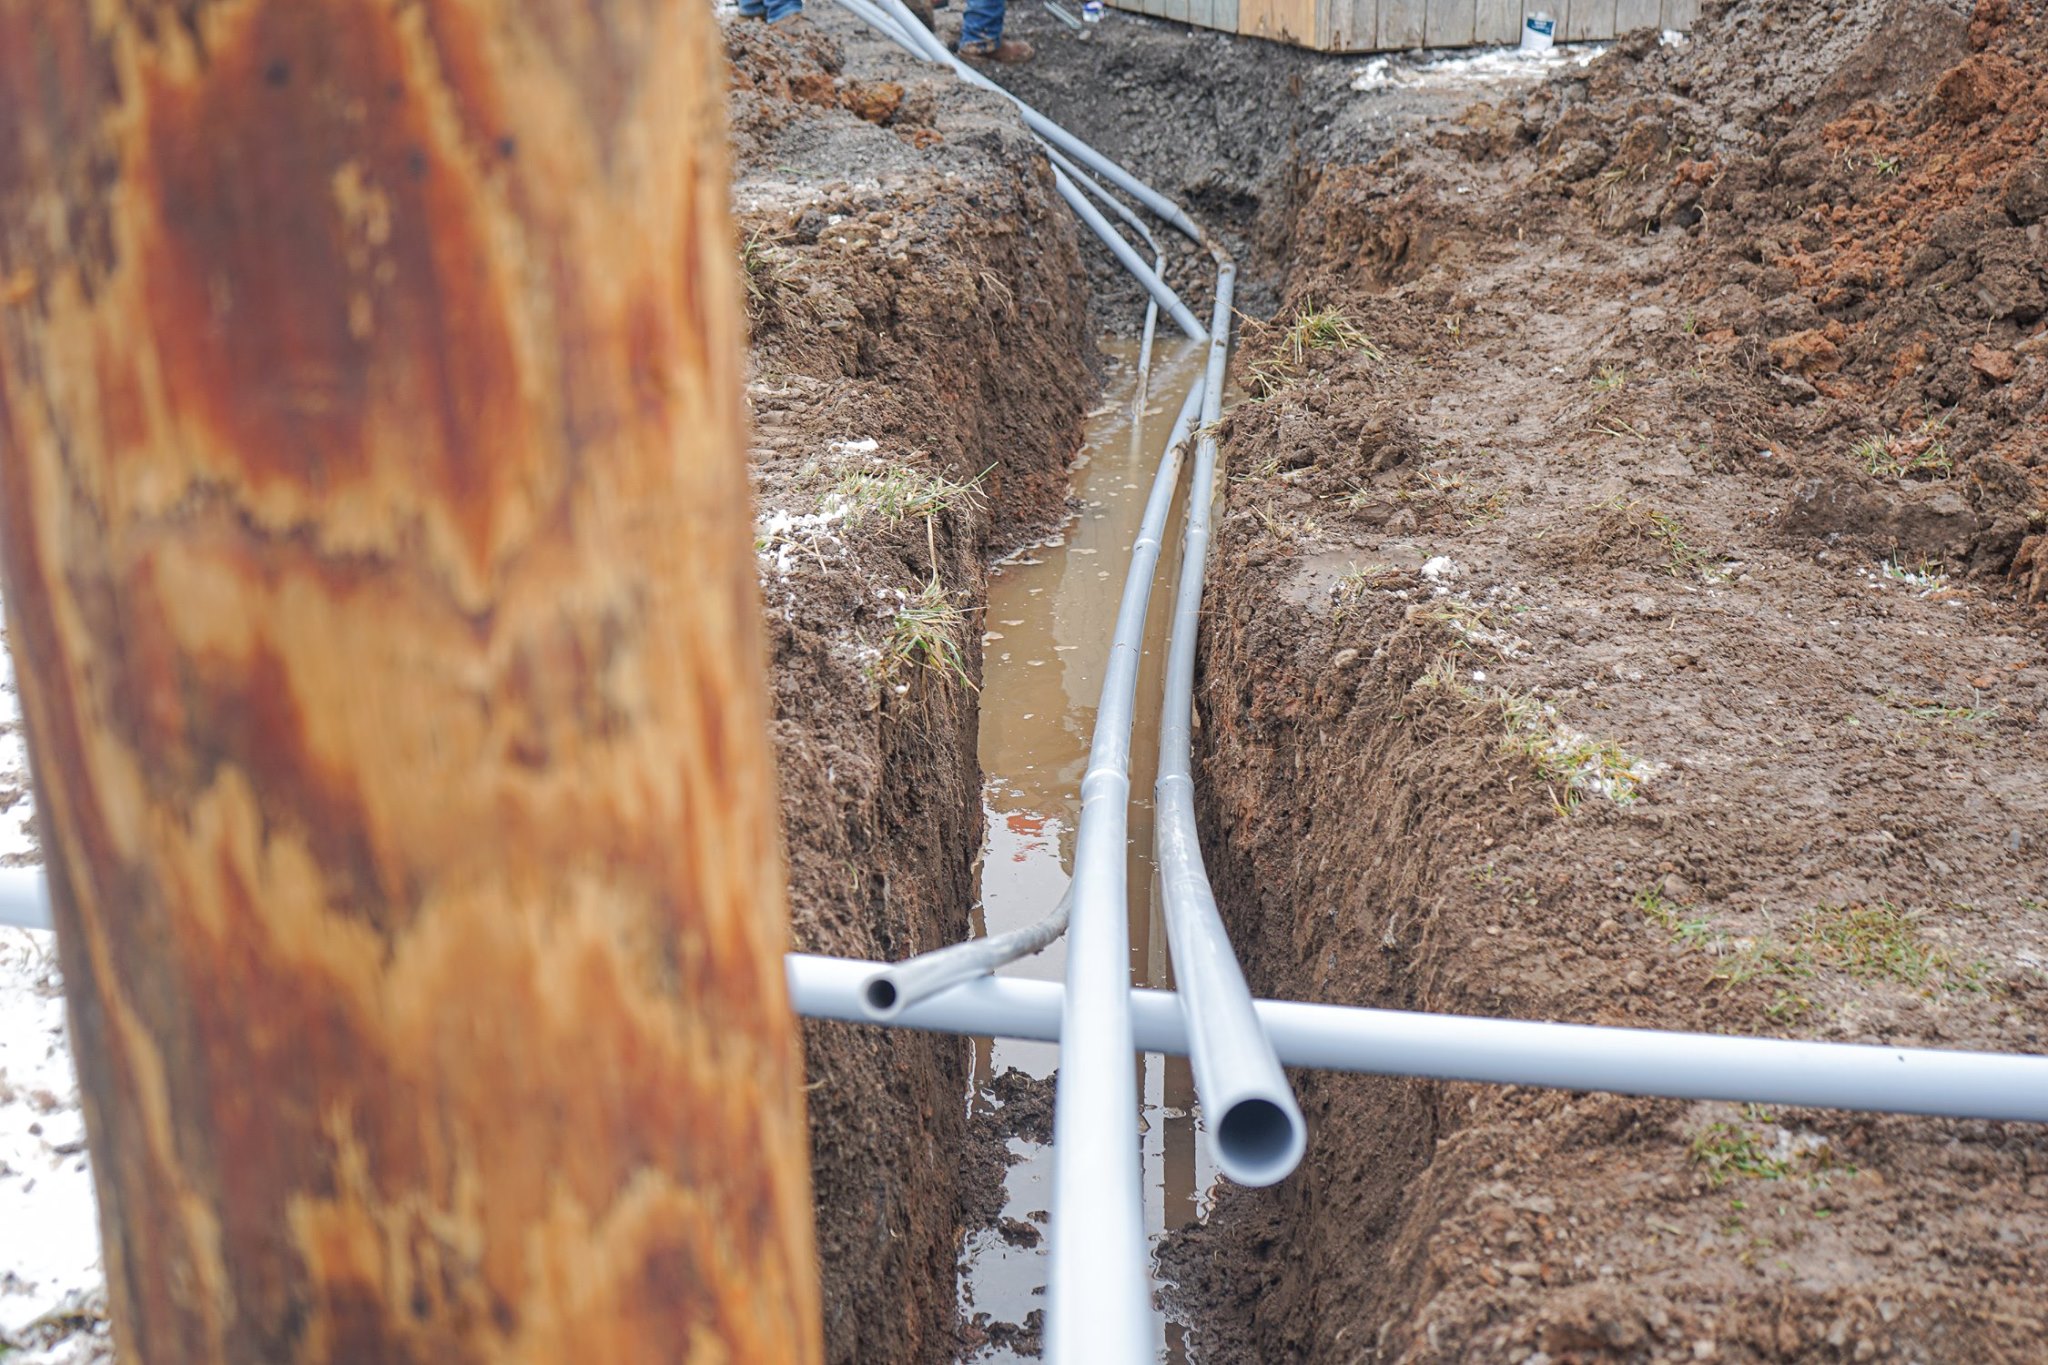 Advantages of Trenchless Pipe Lining